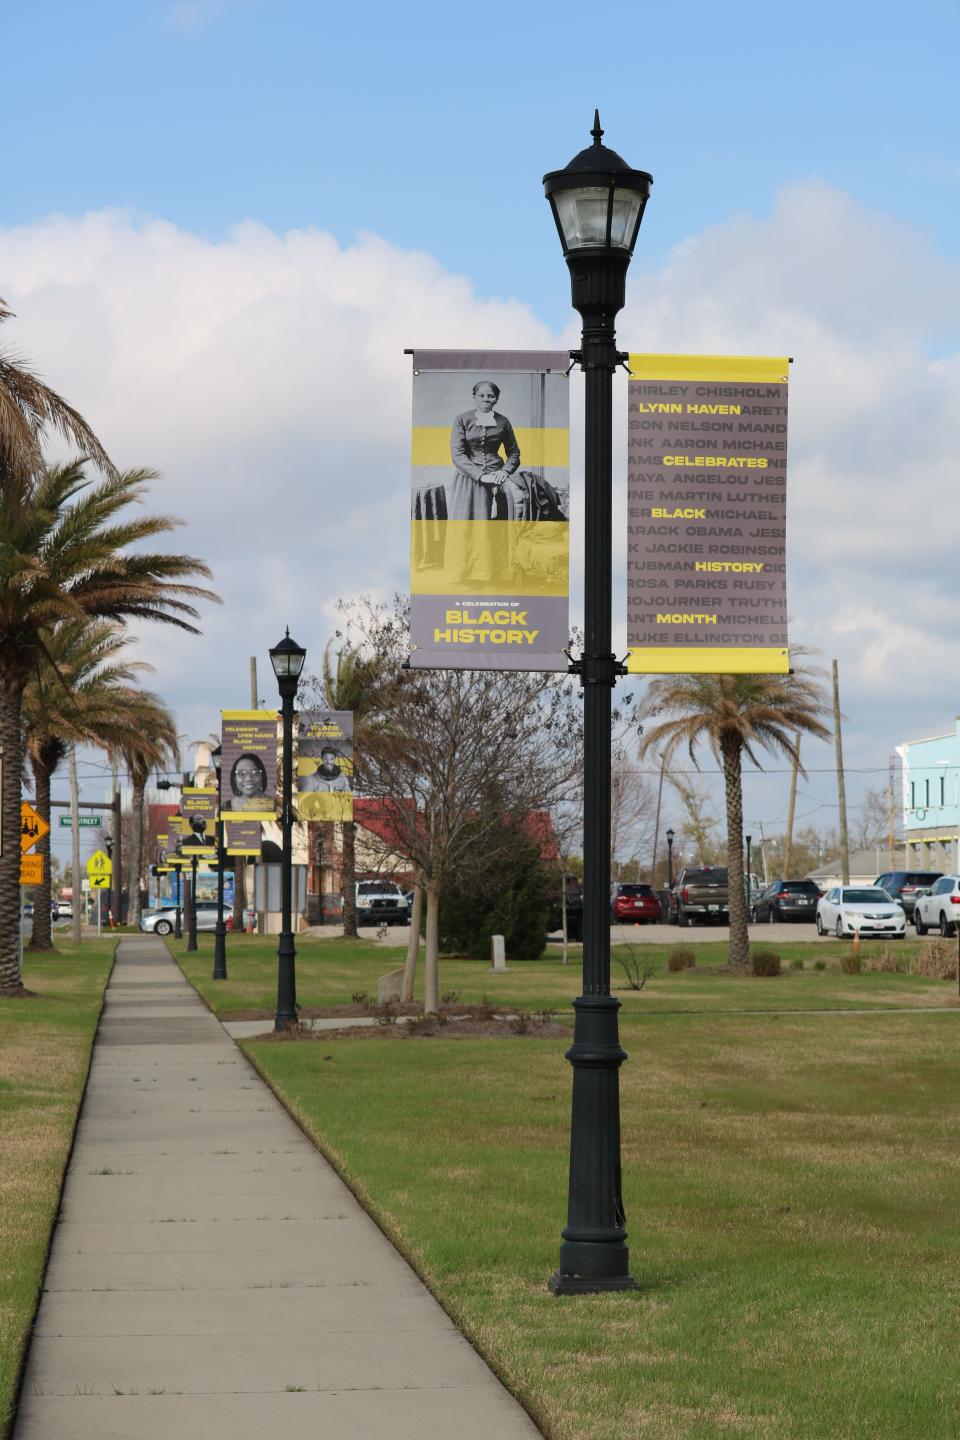 Banners are hung throughout Sharon Sheffield Park in Lynn Haven to highlight African American leaders in Bay County.